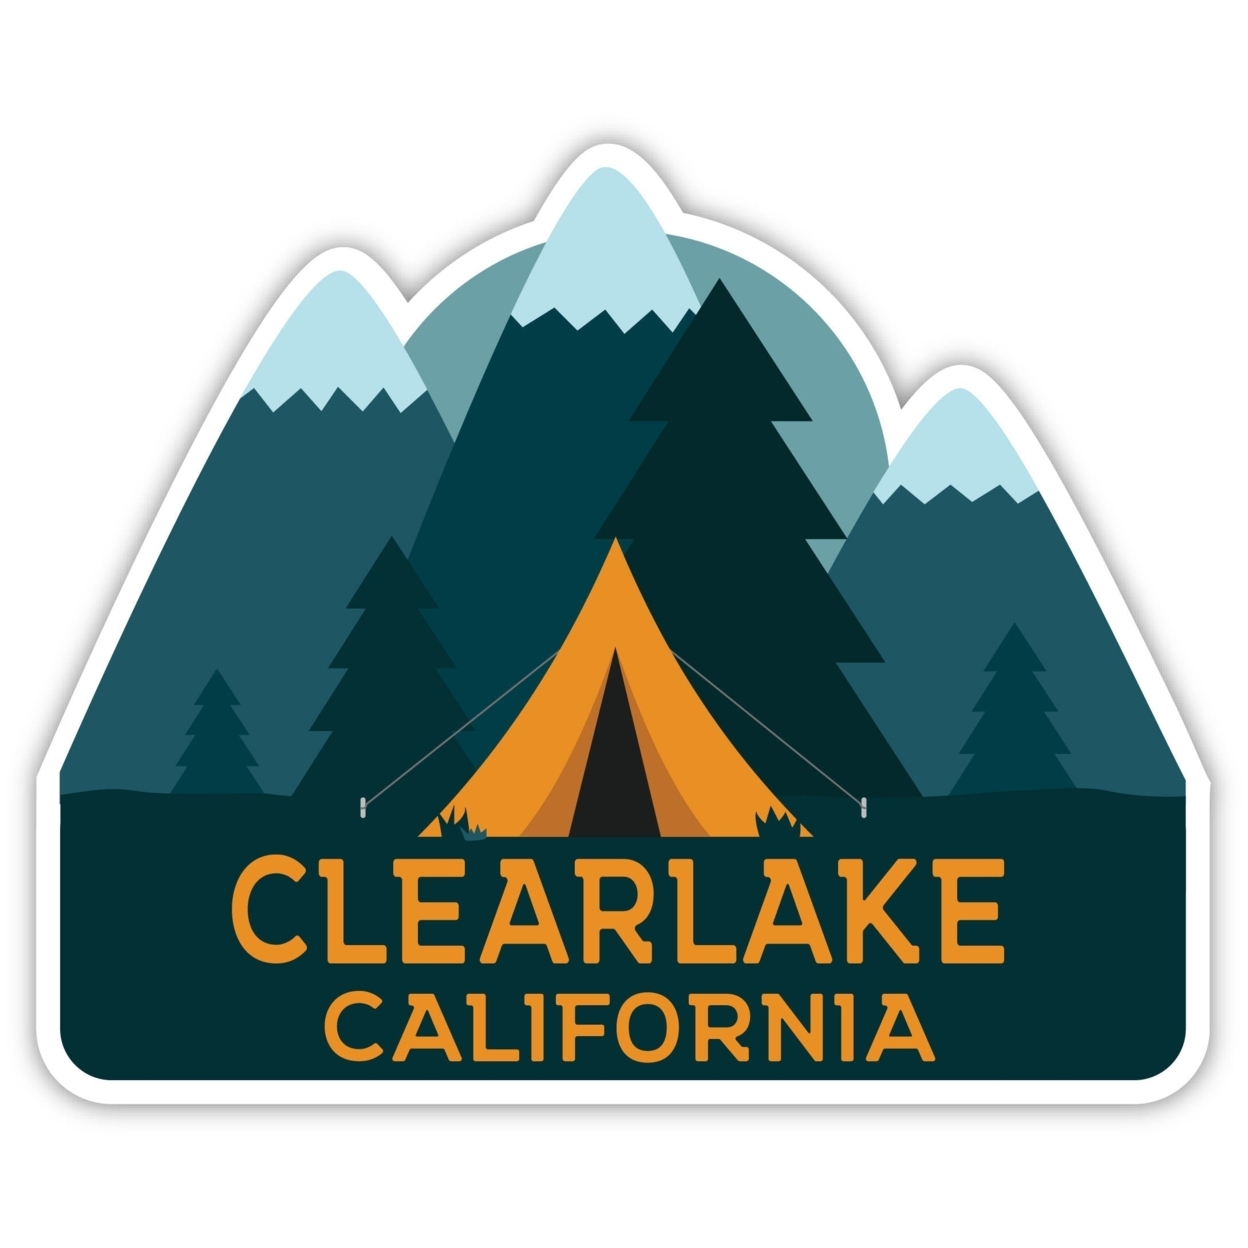 Clearlake California Souvenir Decorative Stickers (Choose Theme And Size) - 4-Pack, 2-Inch, Tent